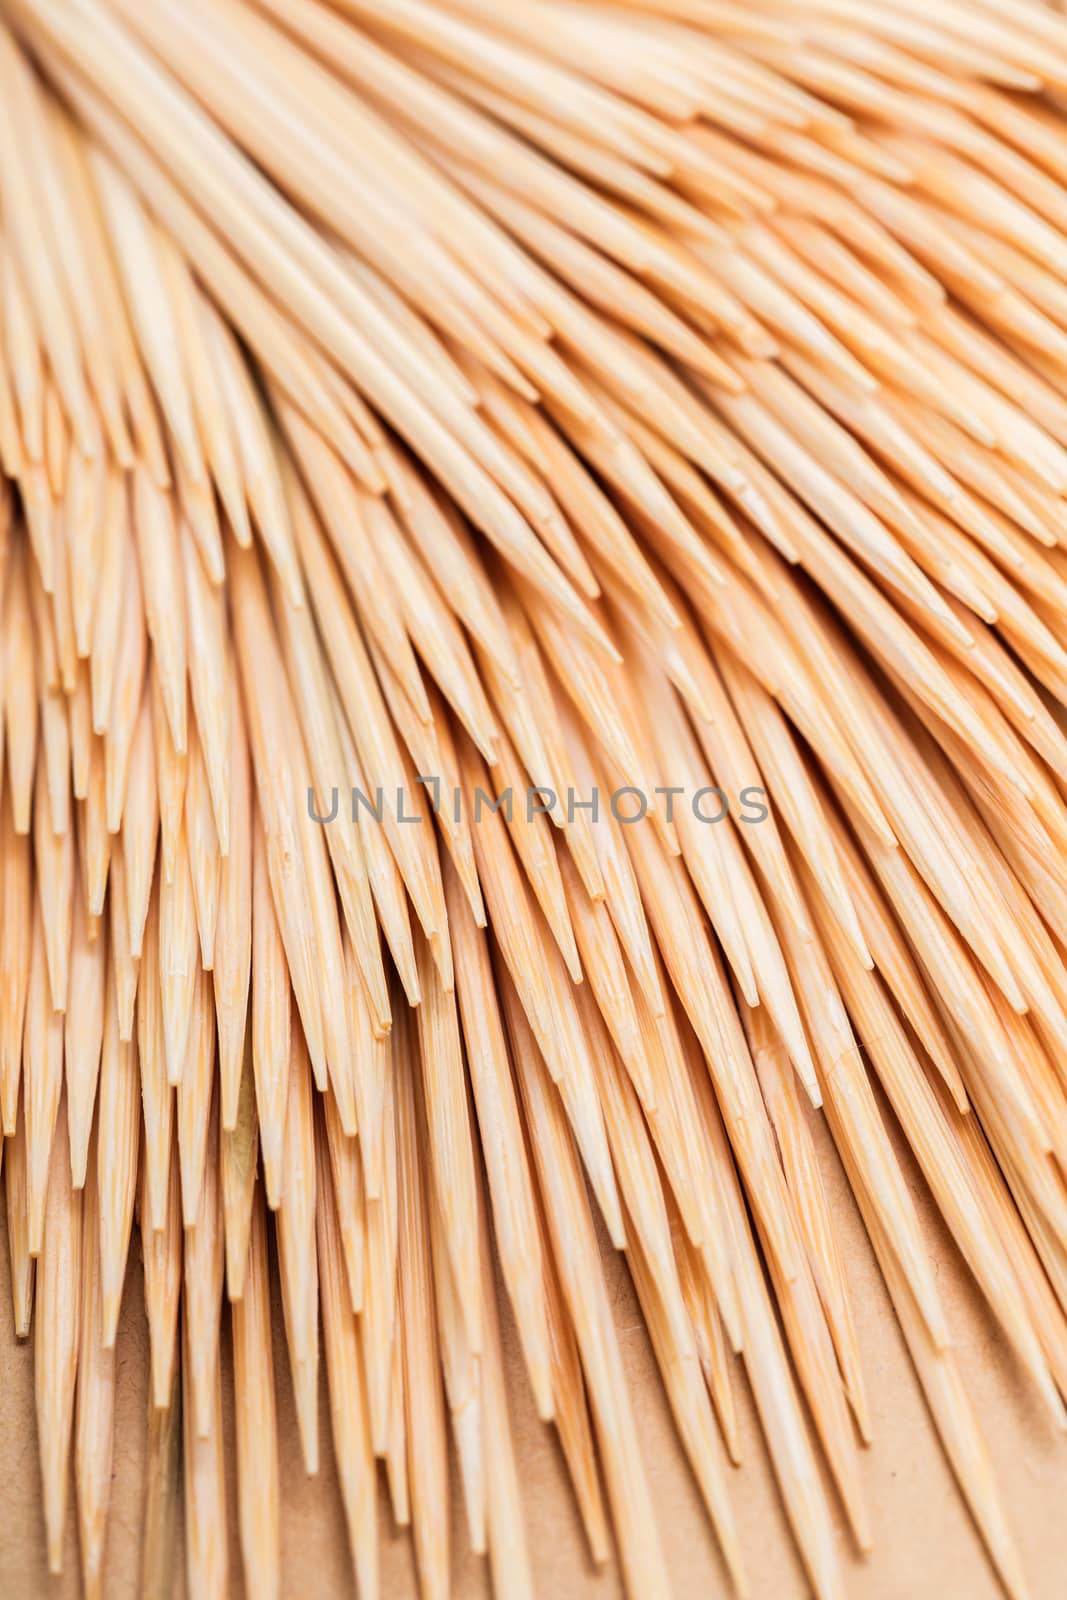 wooden toothpicks close-up by MegaArt